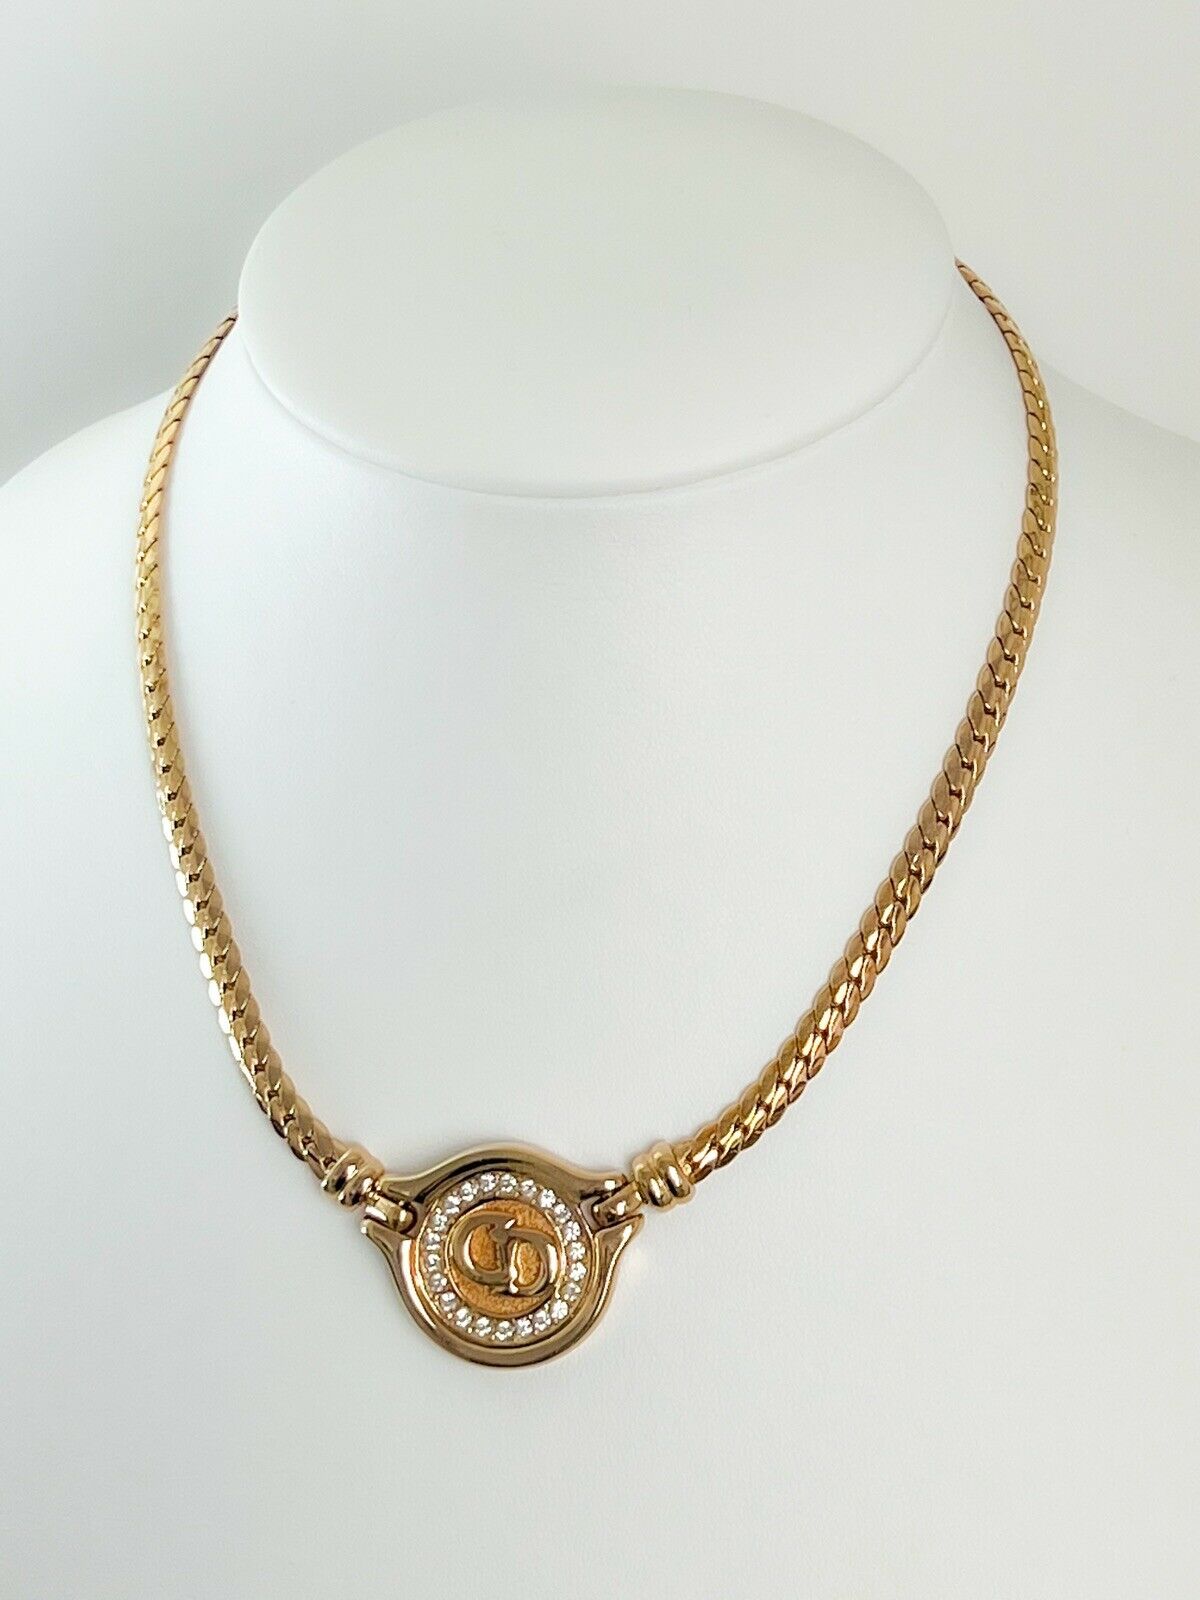 【SOLD OUT】Christian Dior Vintage Choker Necklace Gold Tone CD Logo Rhinestone